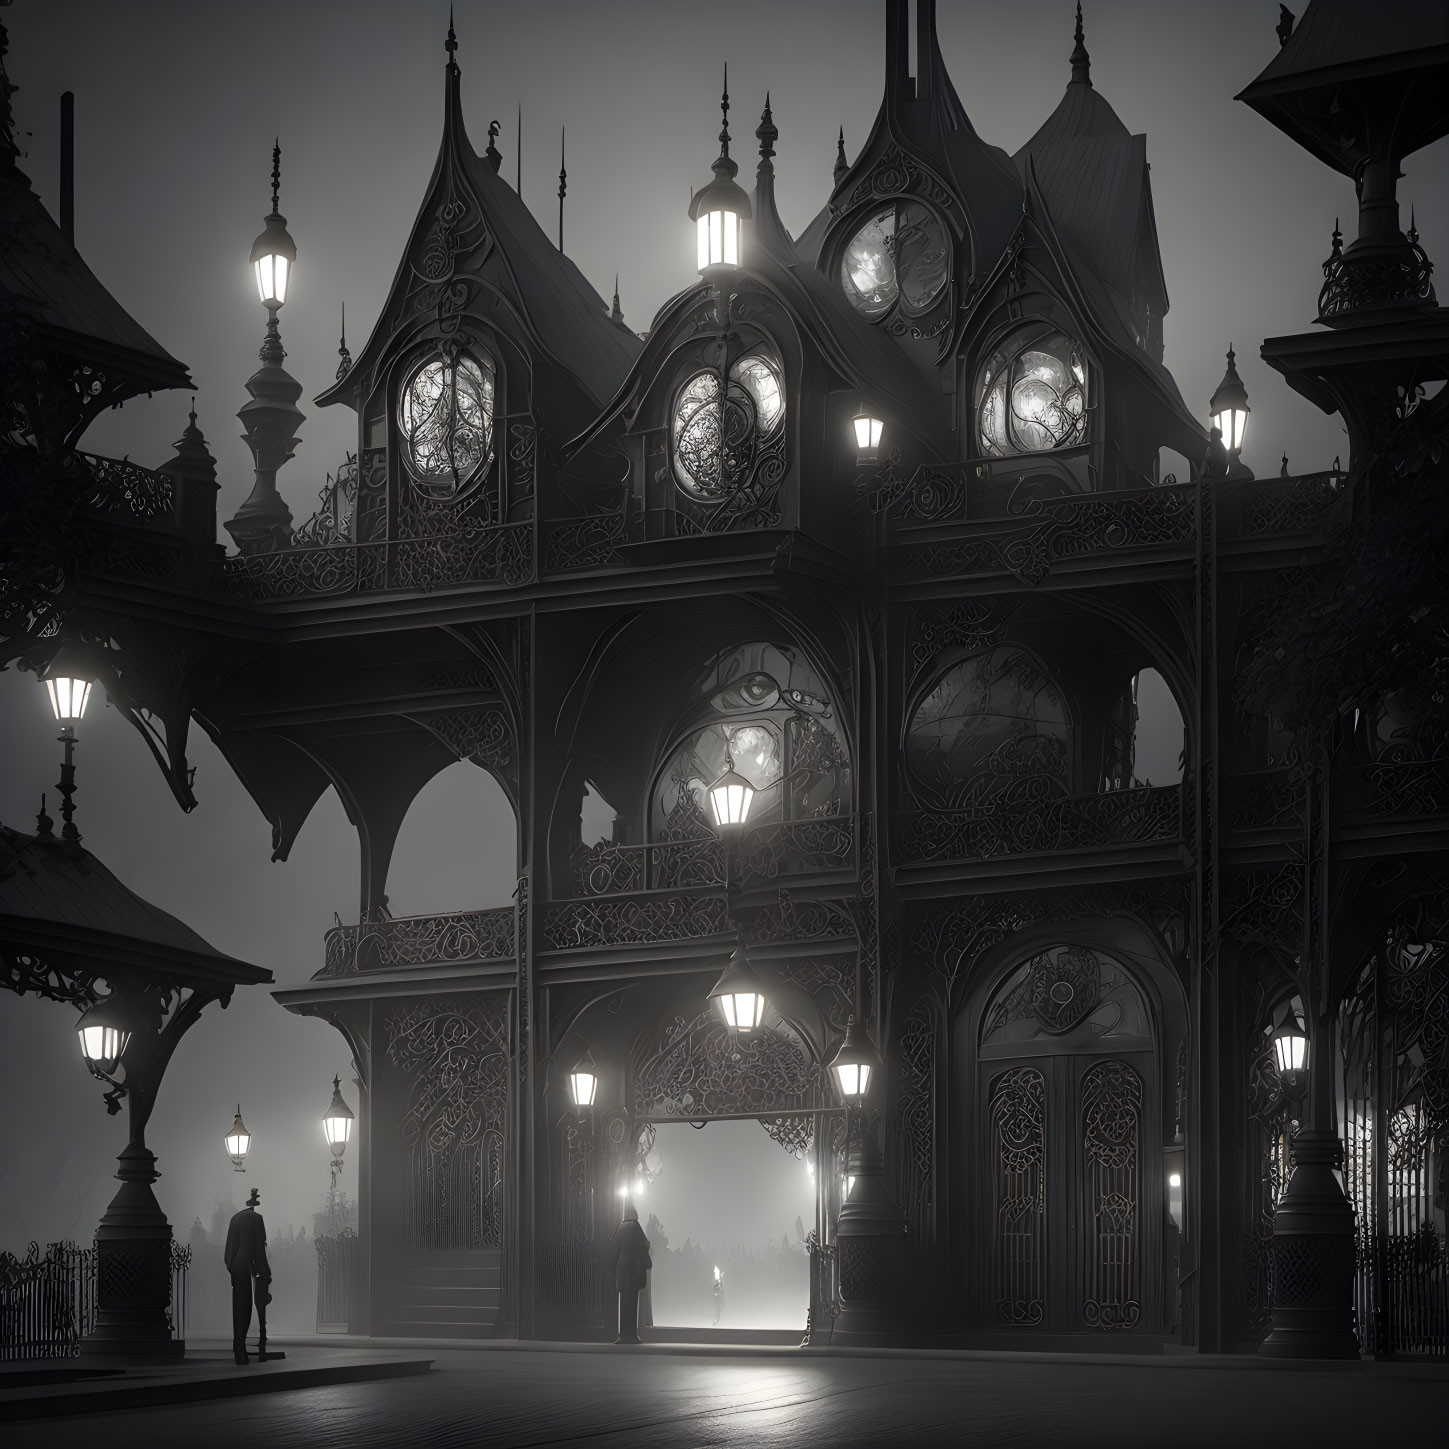 Victorian-style illuminated pavilion in foggy evening with gothic architecture details